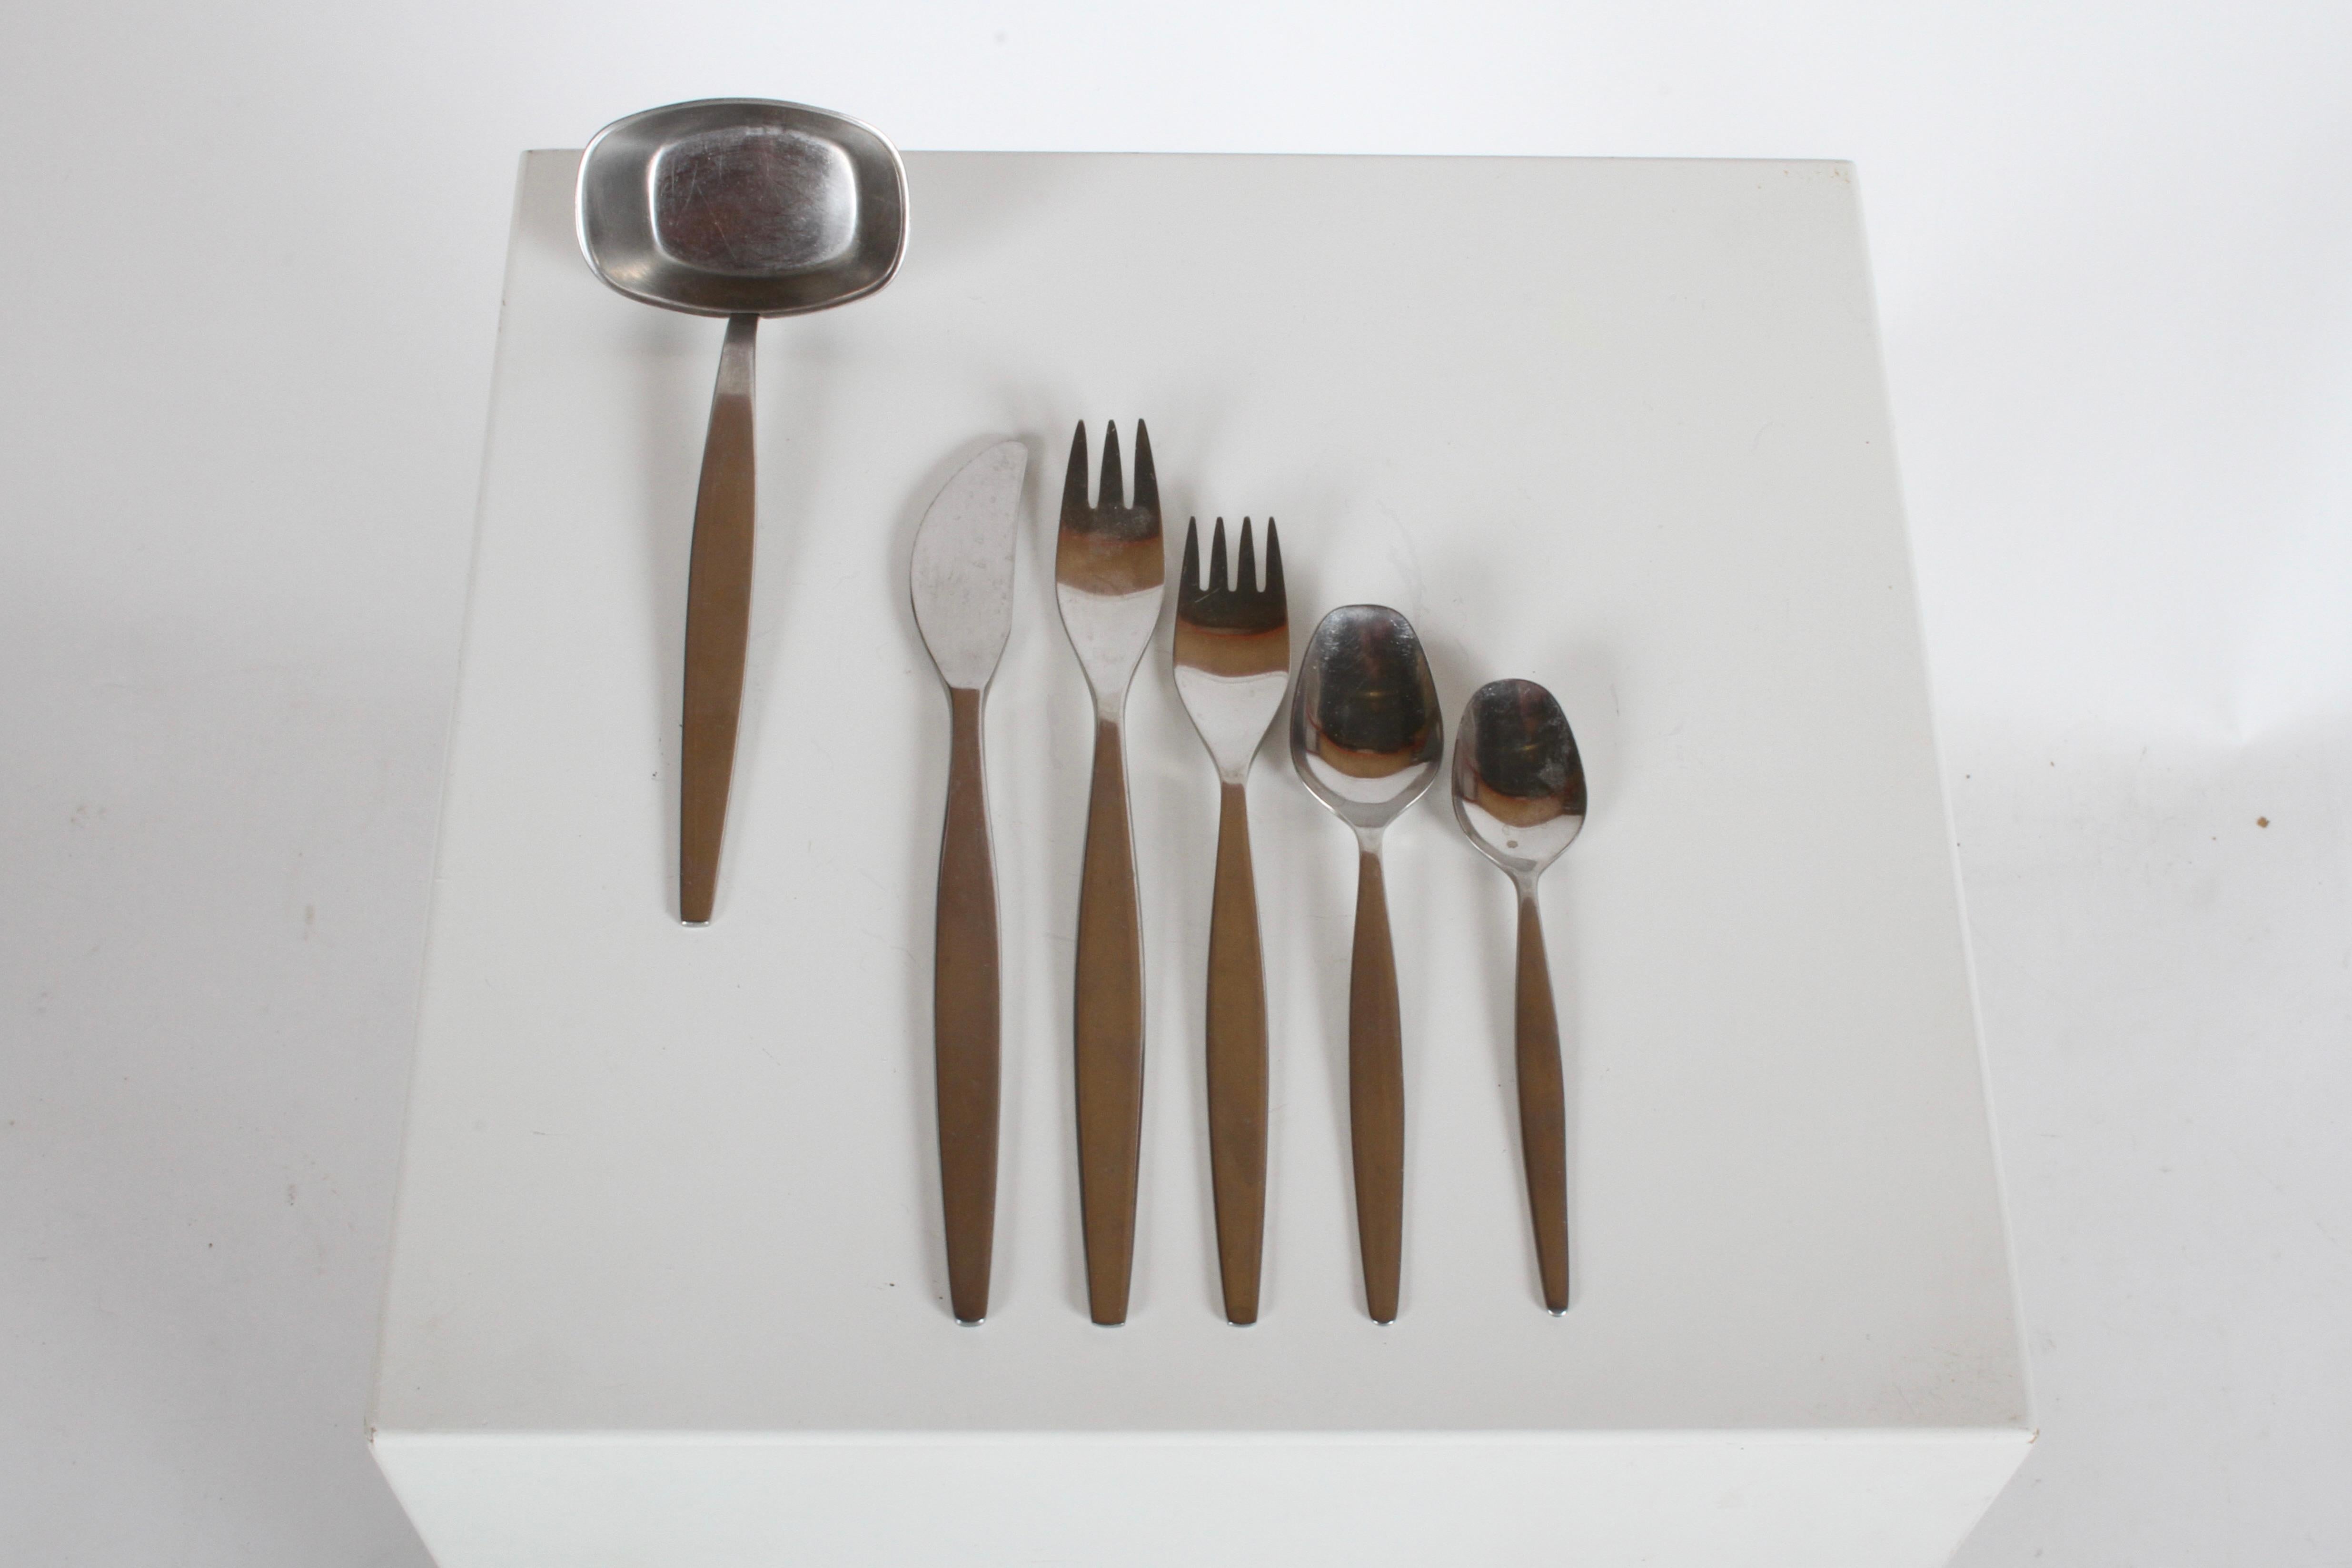 Vintage Mid-Century Modern, Focus by Gense Sweden flatware in satin stainless. Partial set, to add to your current or to build your own set. Light scratches to be expected. Marked

4 Knives, 7 7/5